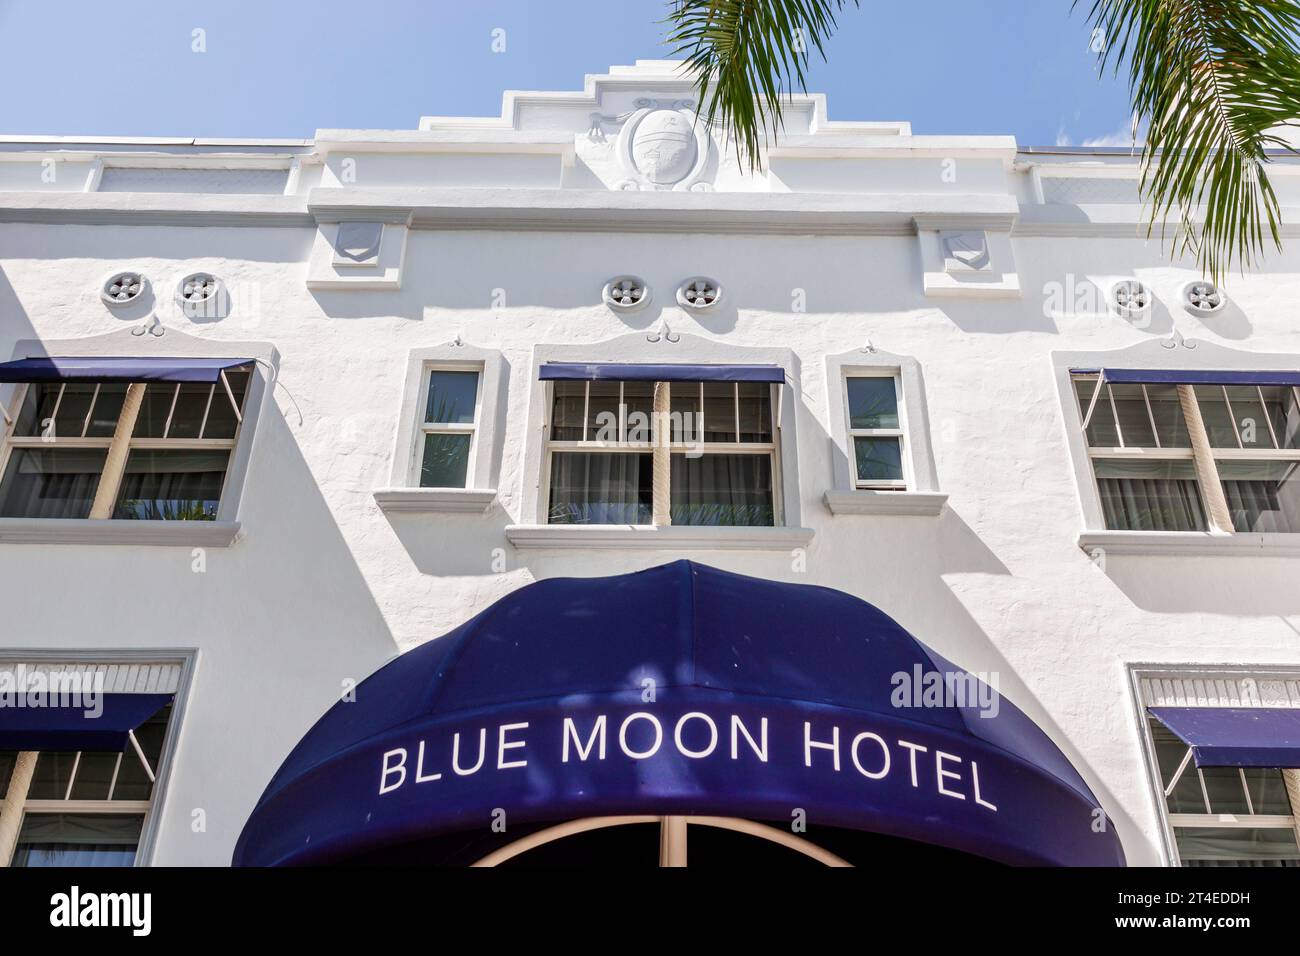 Miami Beach Florida,outside exterior,building front entrance hotel,Collins Avenue,Blue Moon Hotel sign awning,hotels motels businesses Stock Photo